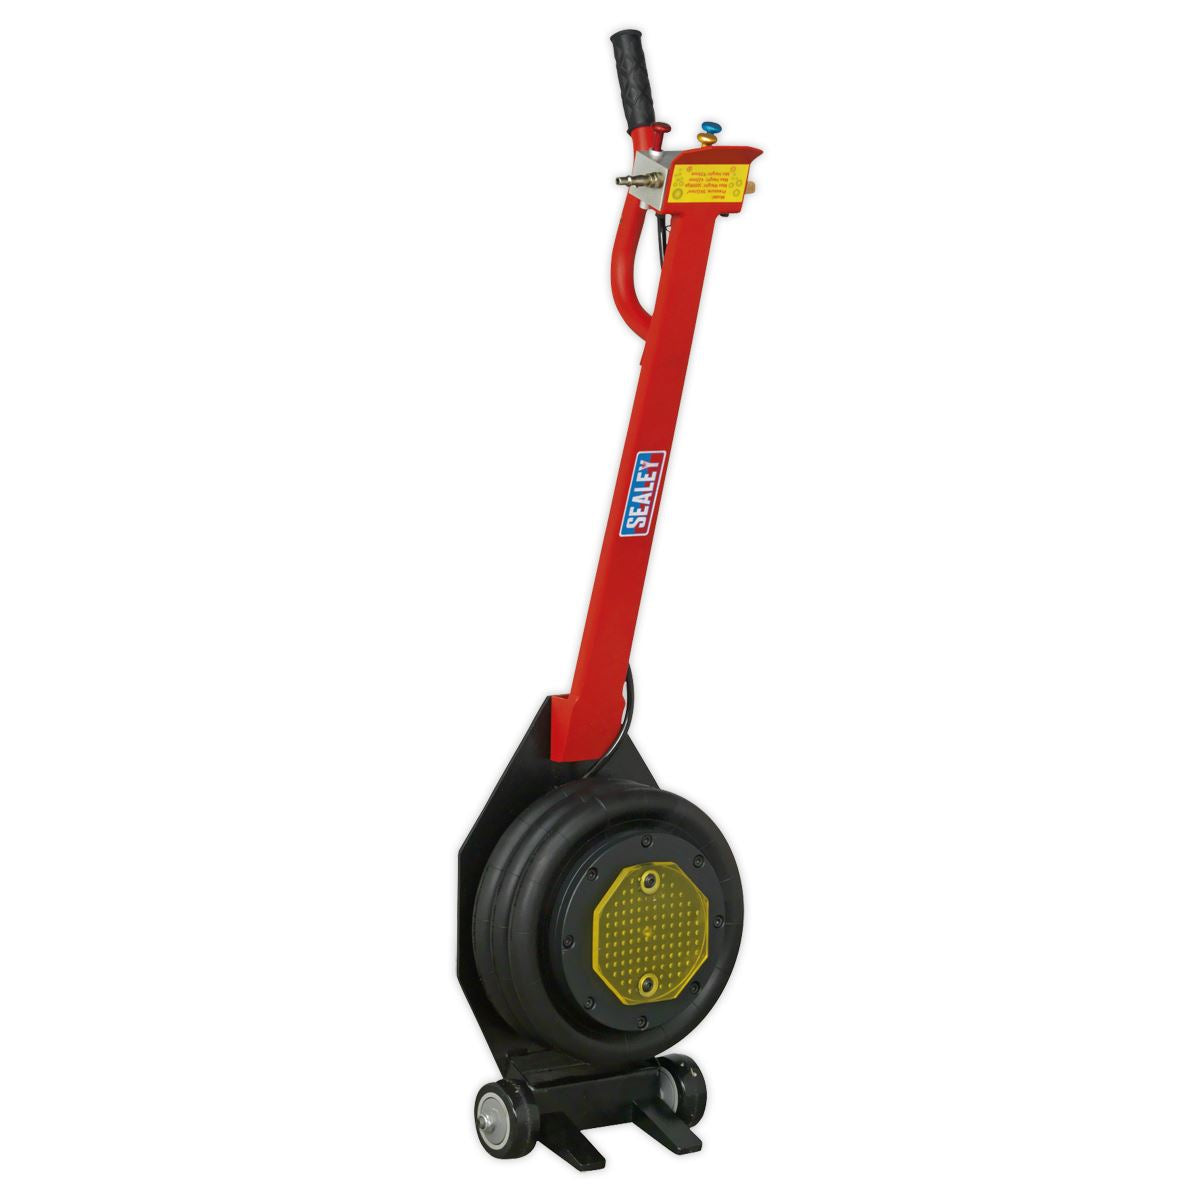 Sealey Premier Premier Air Operated Fast Jack 3 Tonne 3-Stage - Long Handle